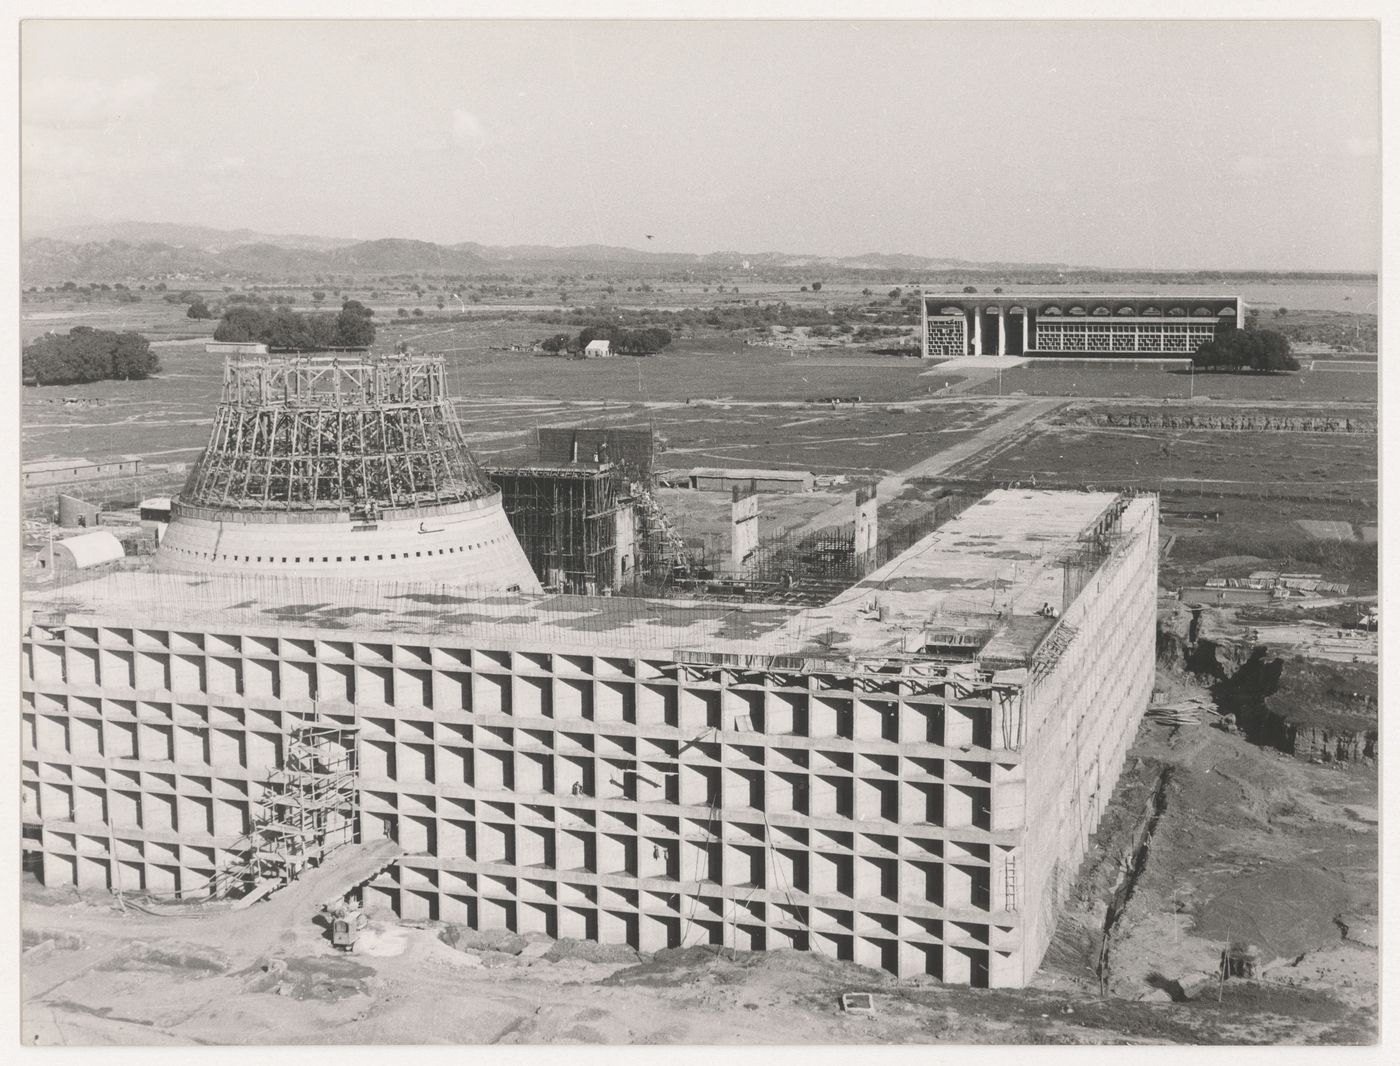 View of the Assembly under construction with the High Court in the background, Capitol Complex, Sector 1, Chandigarh, India